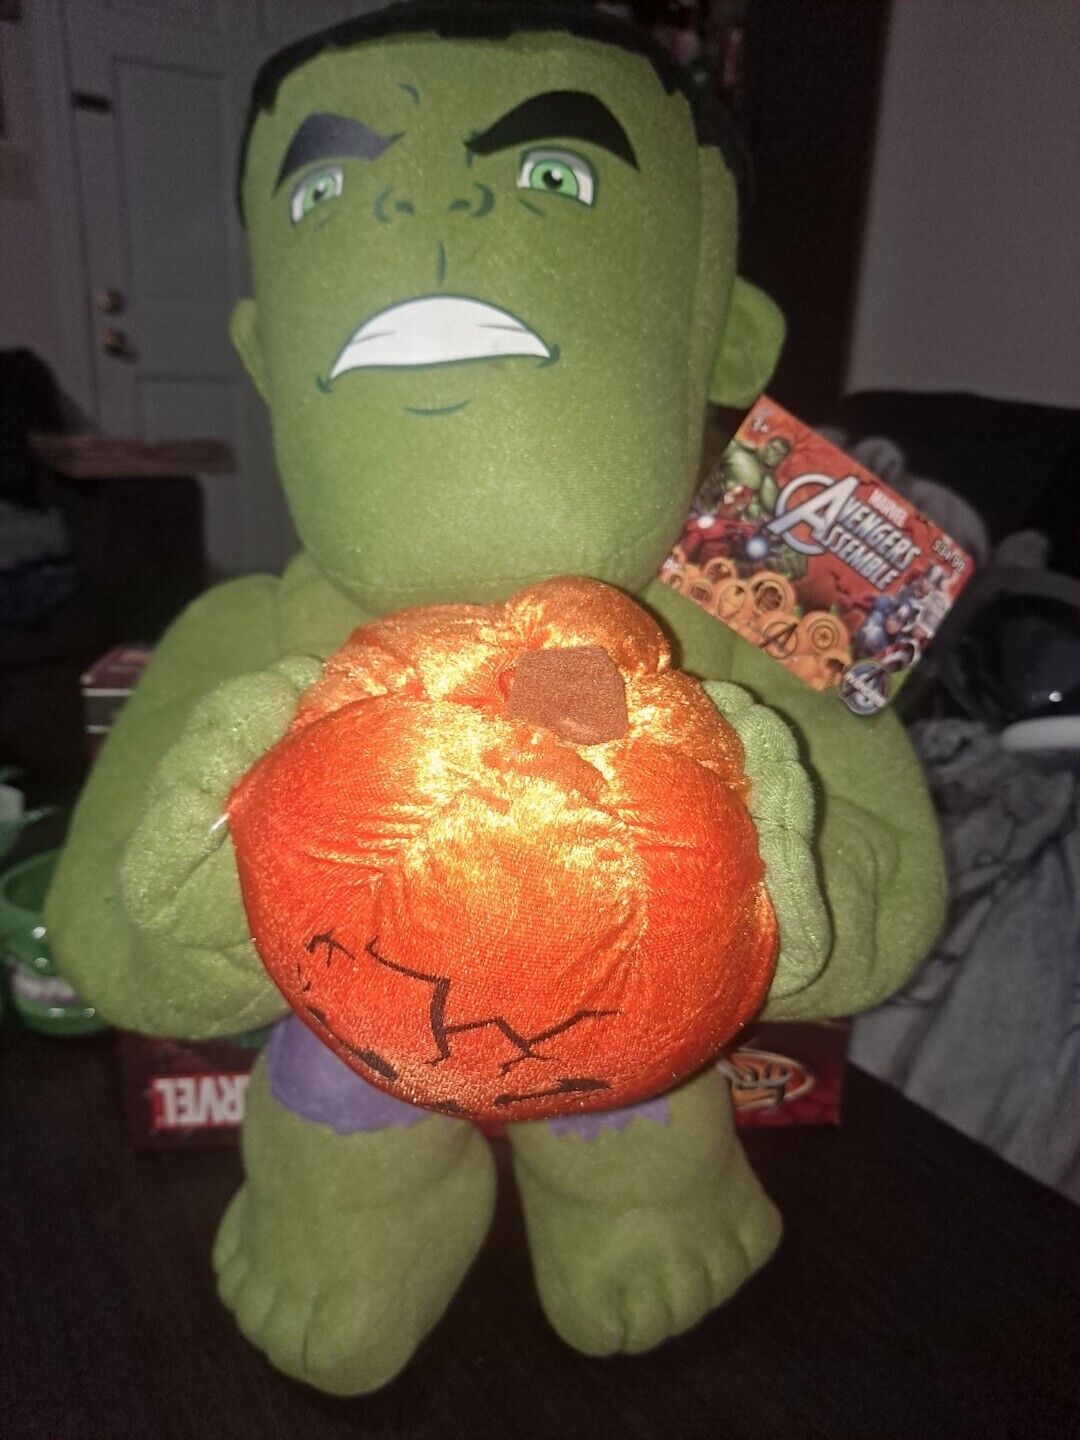 INCREDIBLE HULK HALLOWEEN PLUSHIE WITH PUMPKIN. PRICED TO SELL